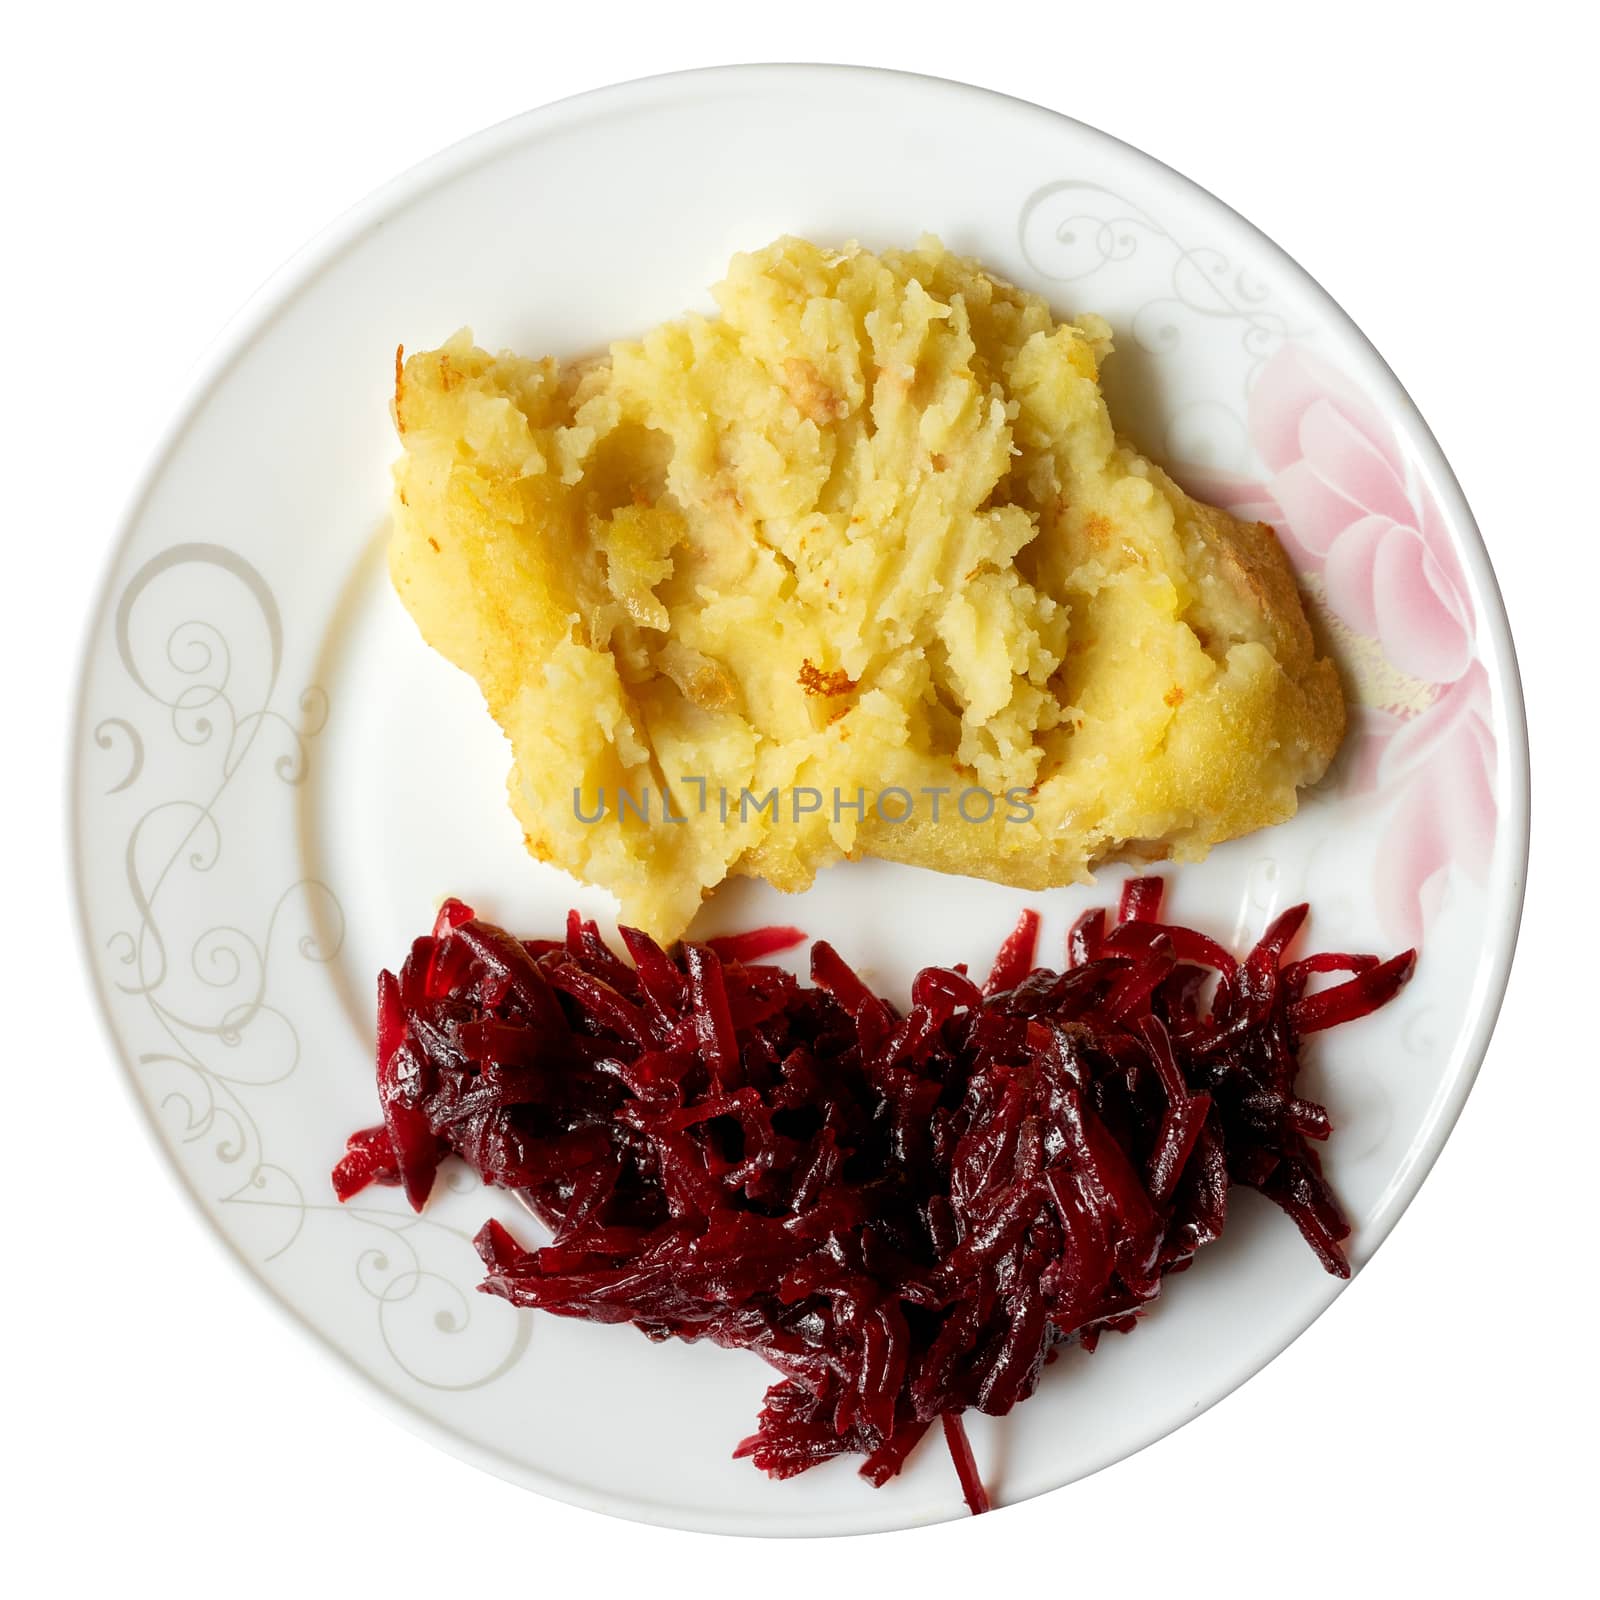 diet food: boiled red beets and mashed potatoes